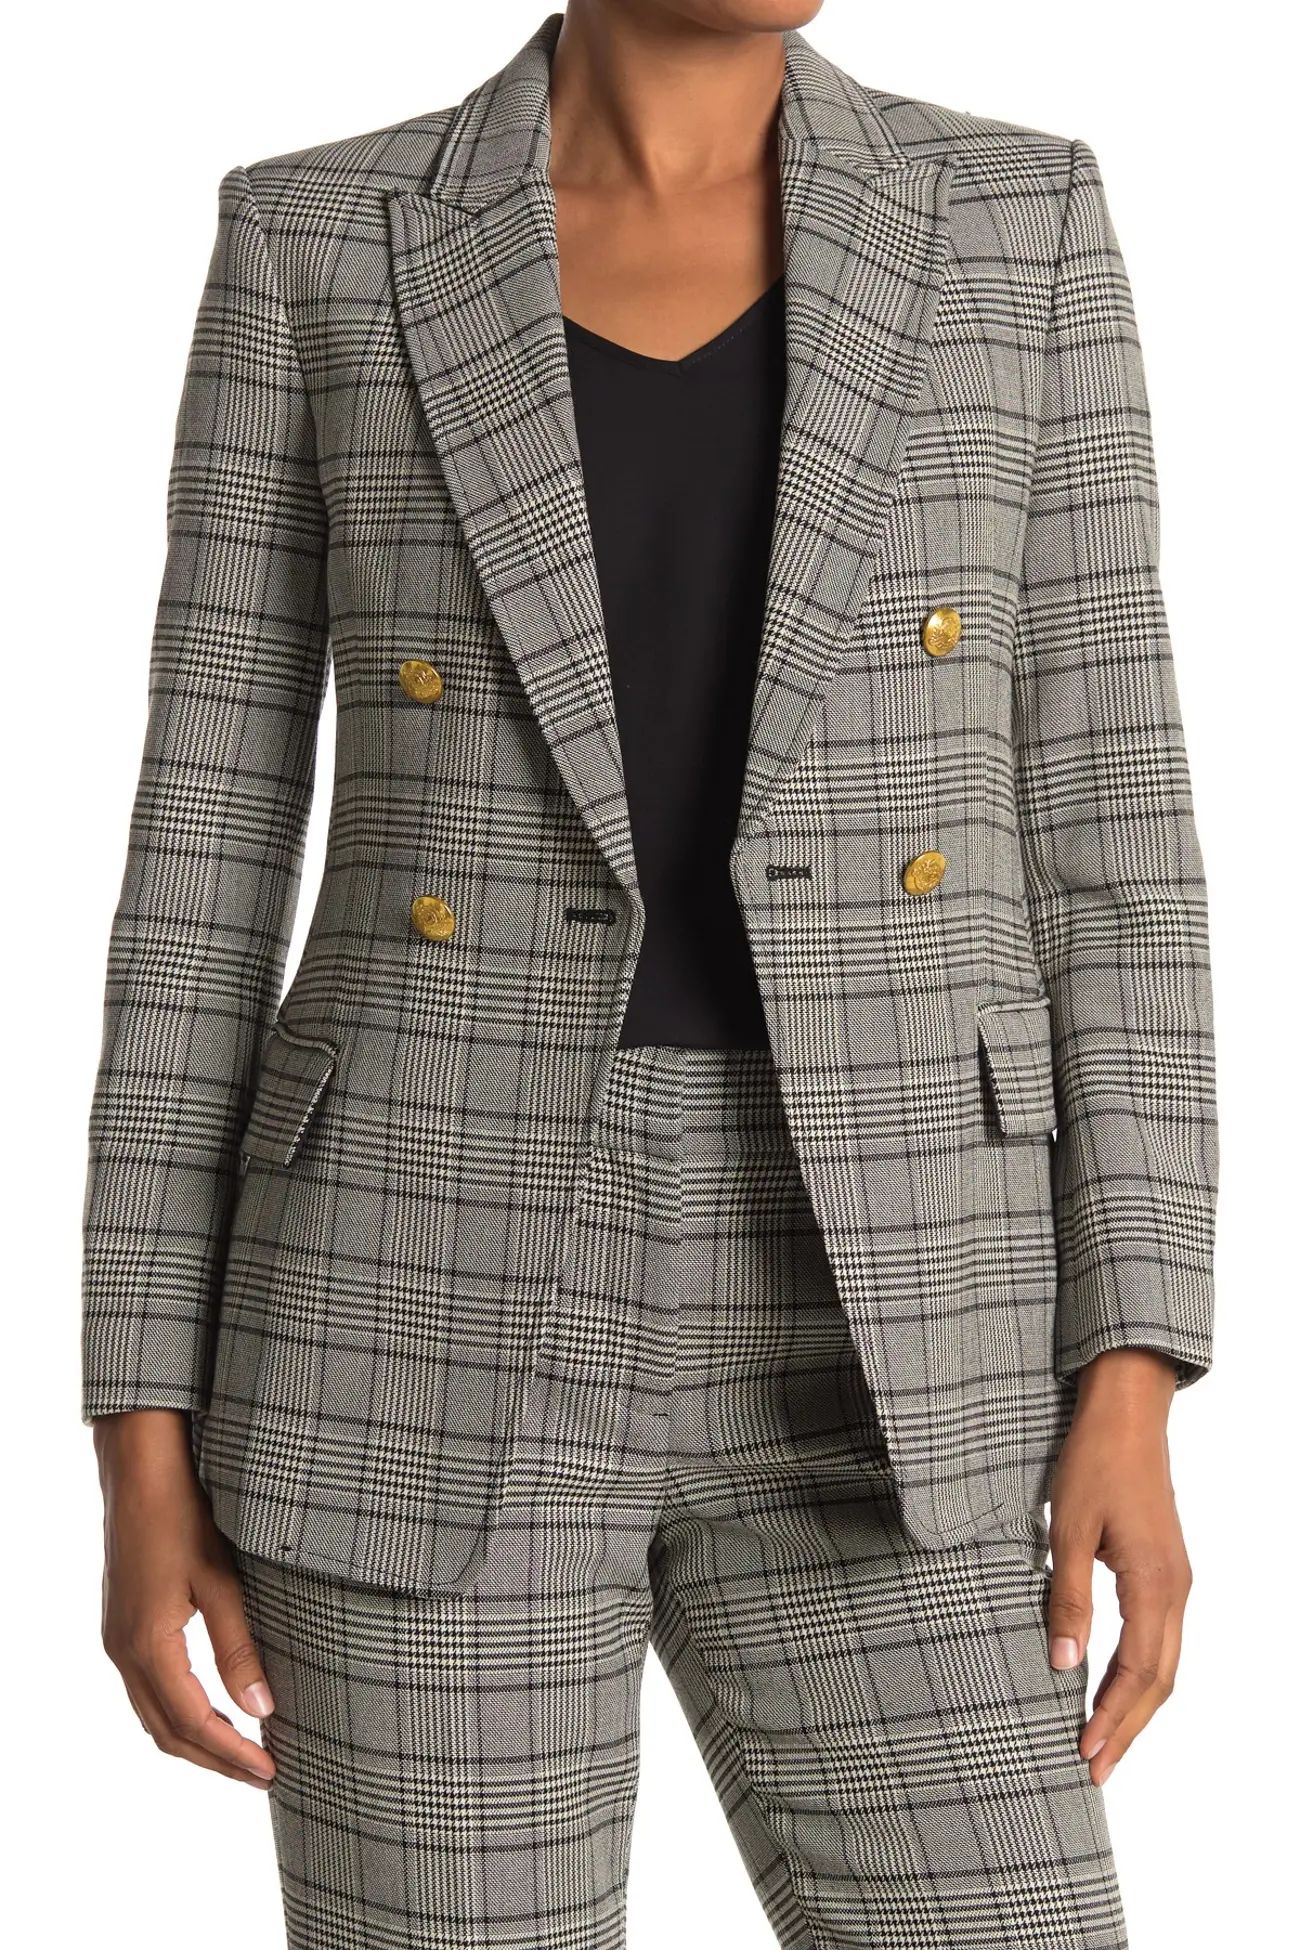 A.L.C. | Sedgwick Plaid Double Breasted Blazer | Nordstrom Rack | Nordstrom Rack